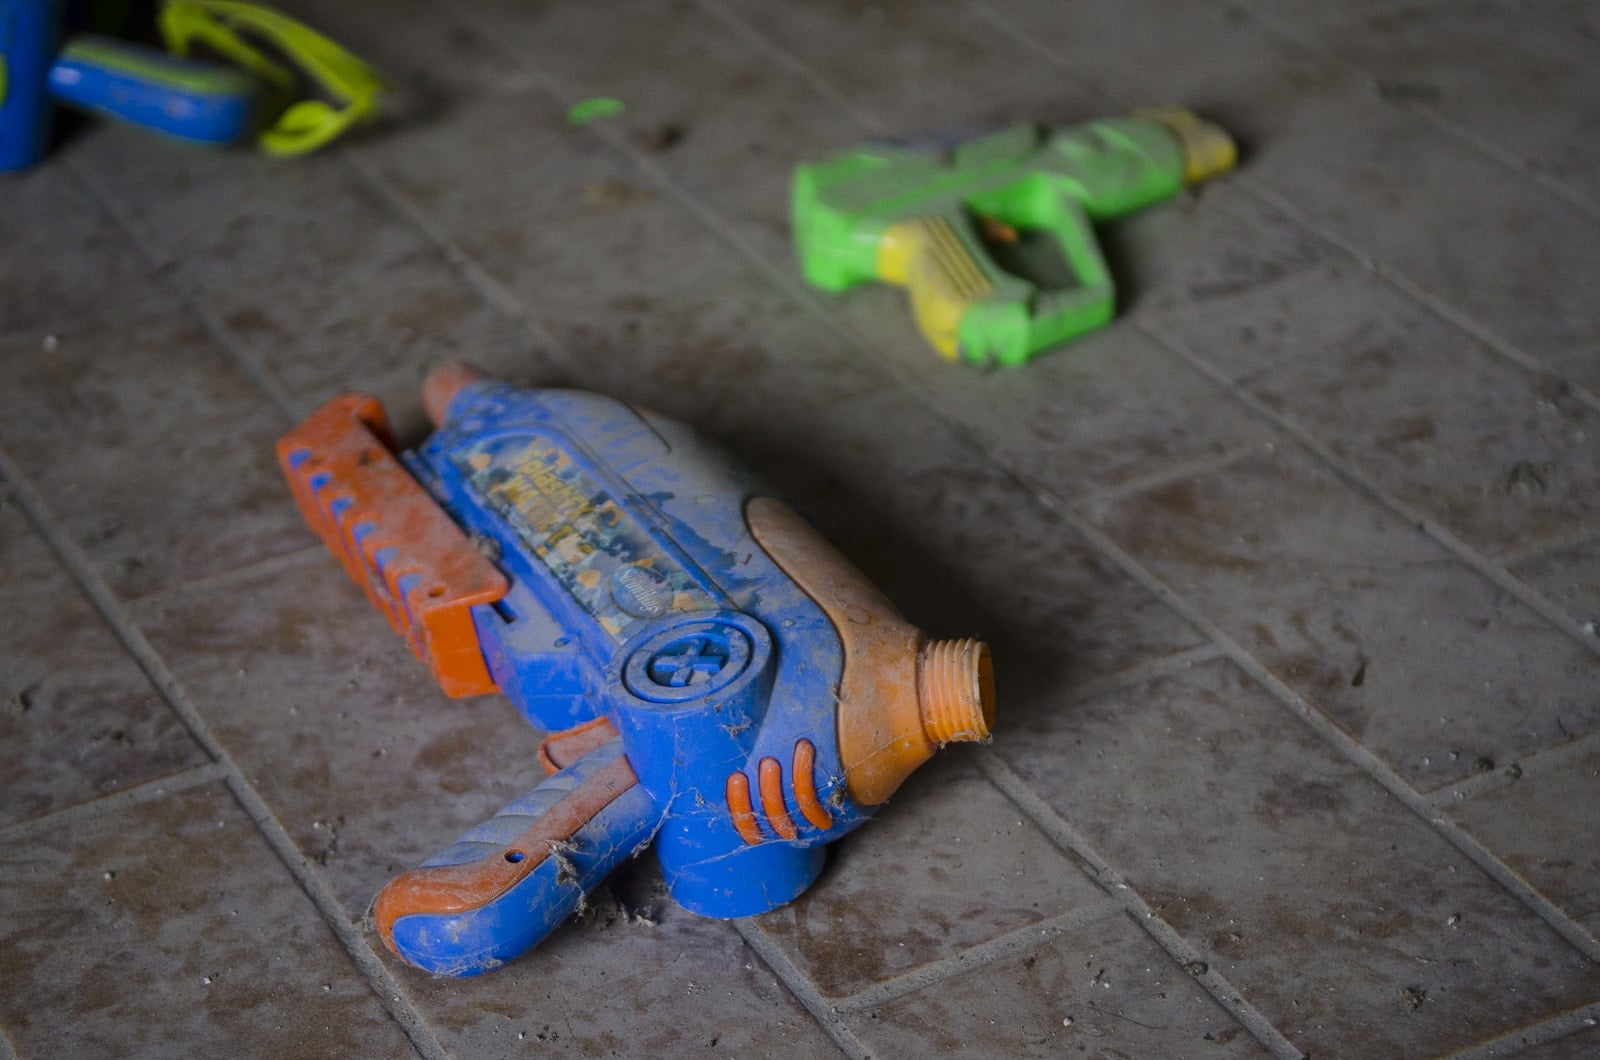 A dusty toy gun on the ground in an abandoned house 